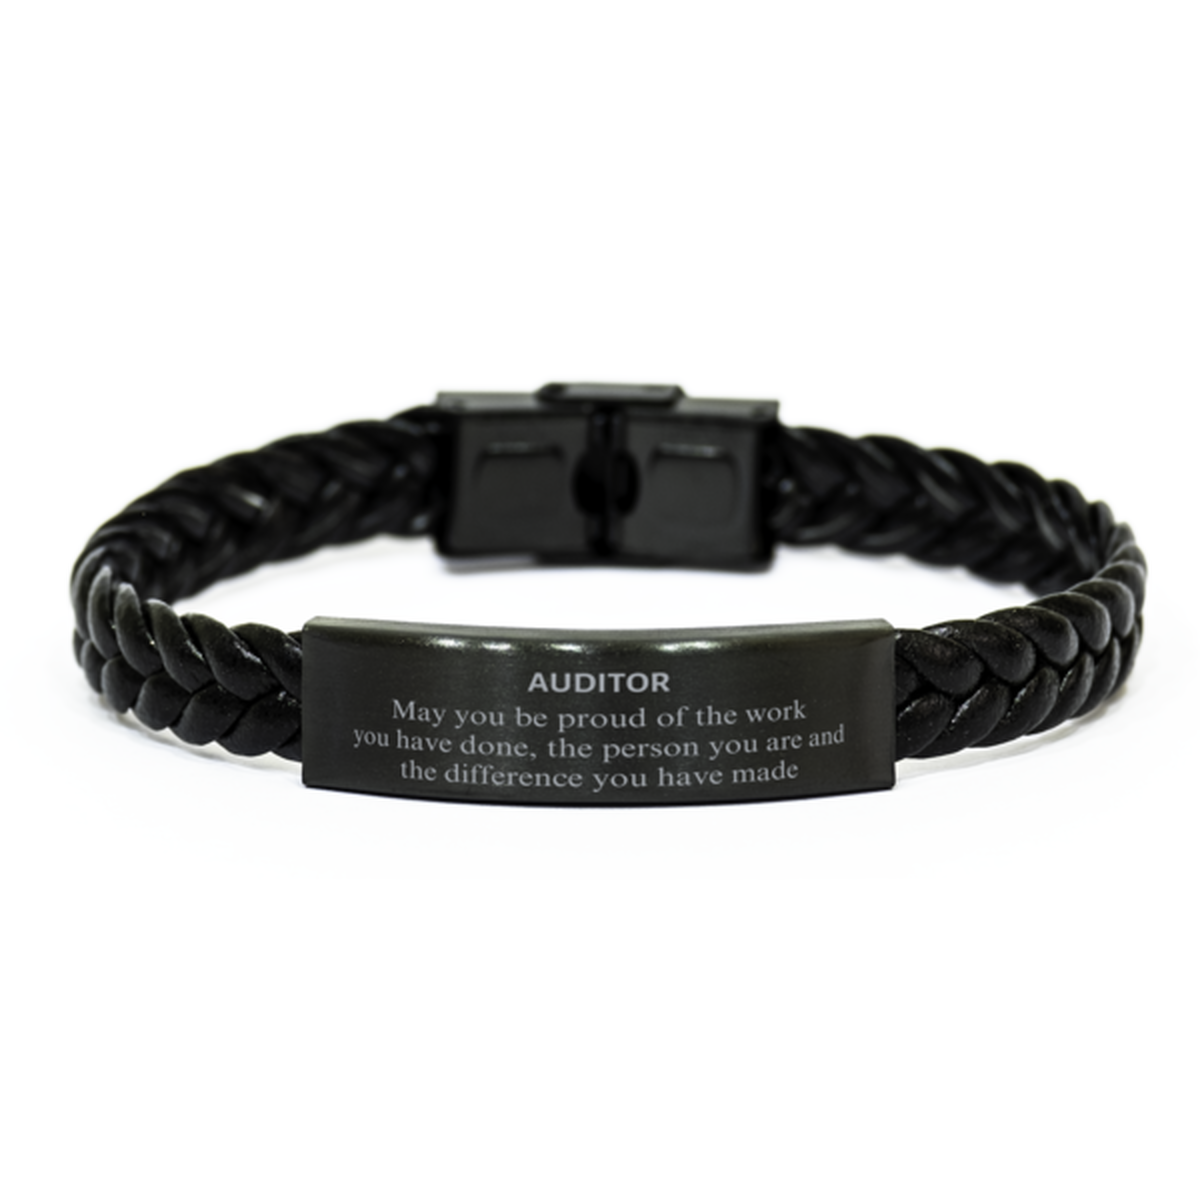 Auditor May you be proud of the work you have done, Retirement Auditor Braided Leather Bracelet for Colleague Appreciation Gifts Amazing for Auditor